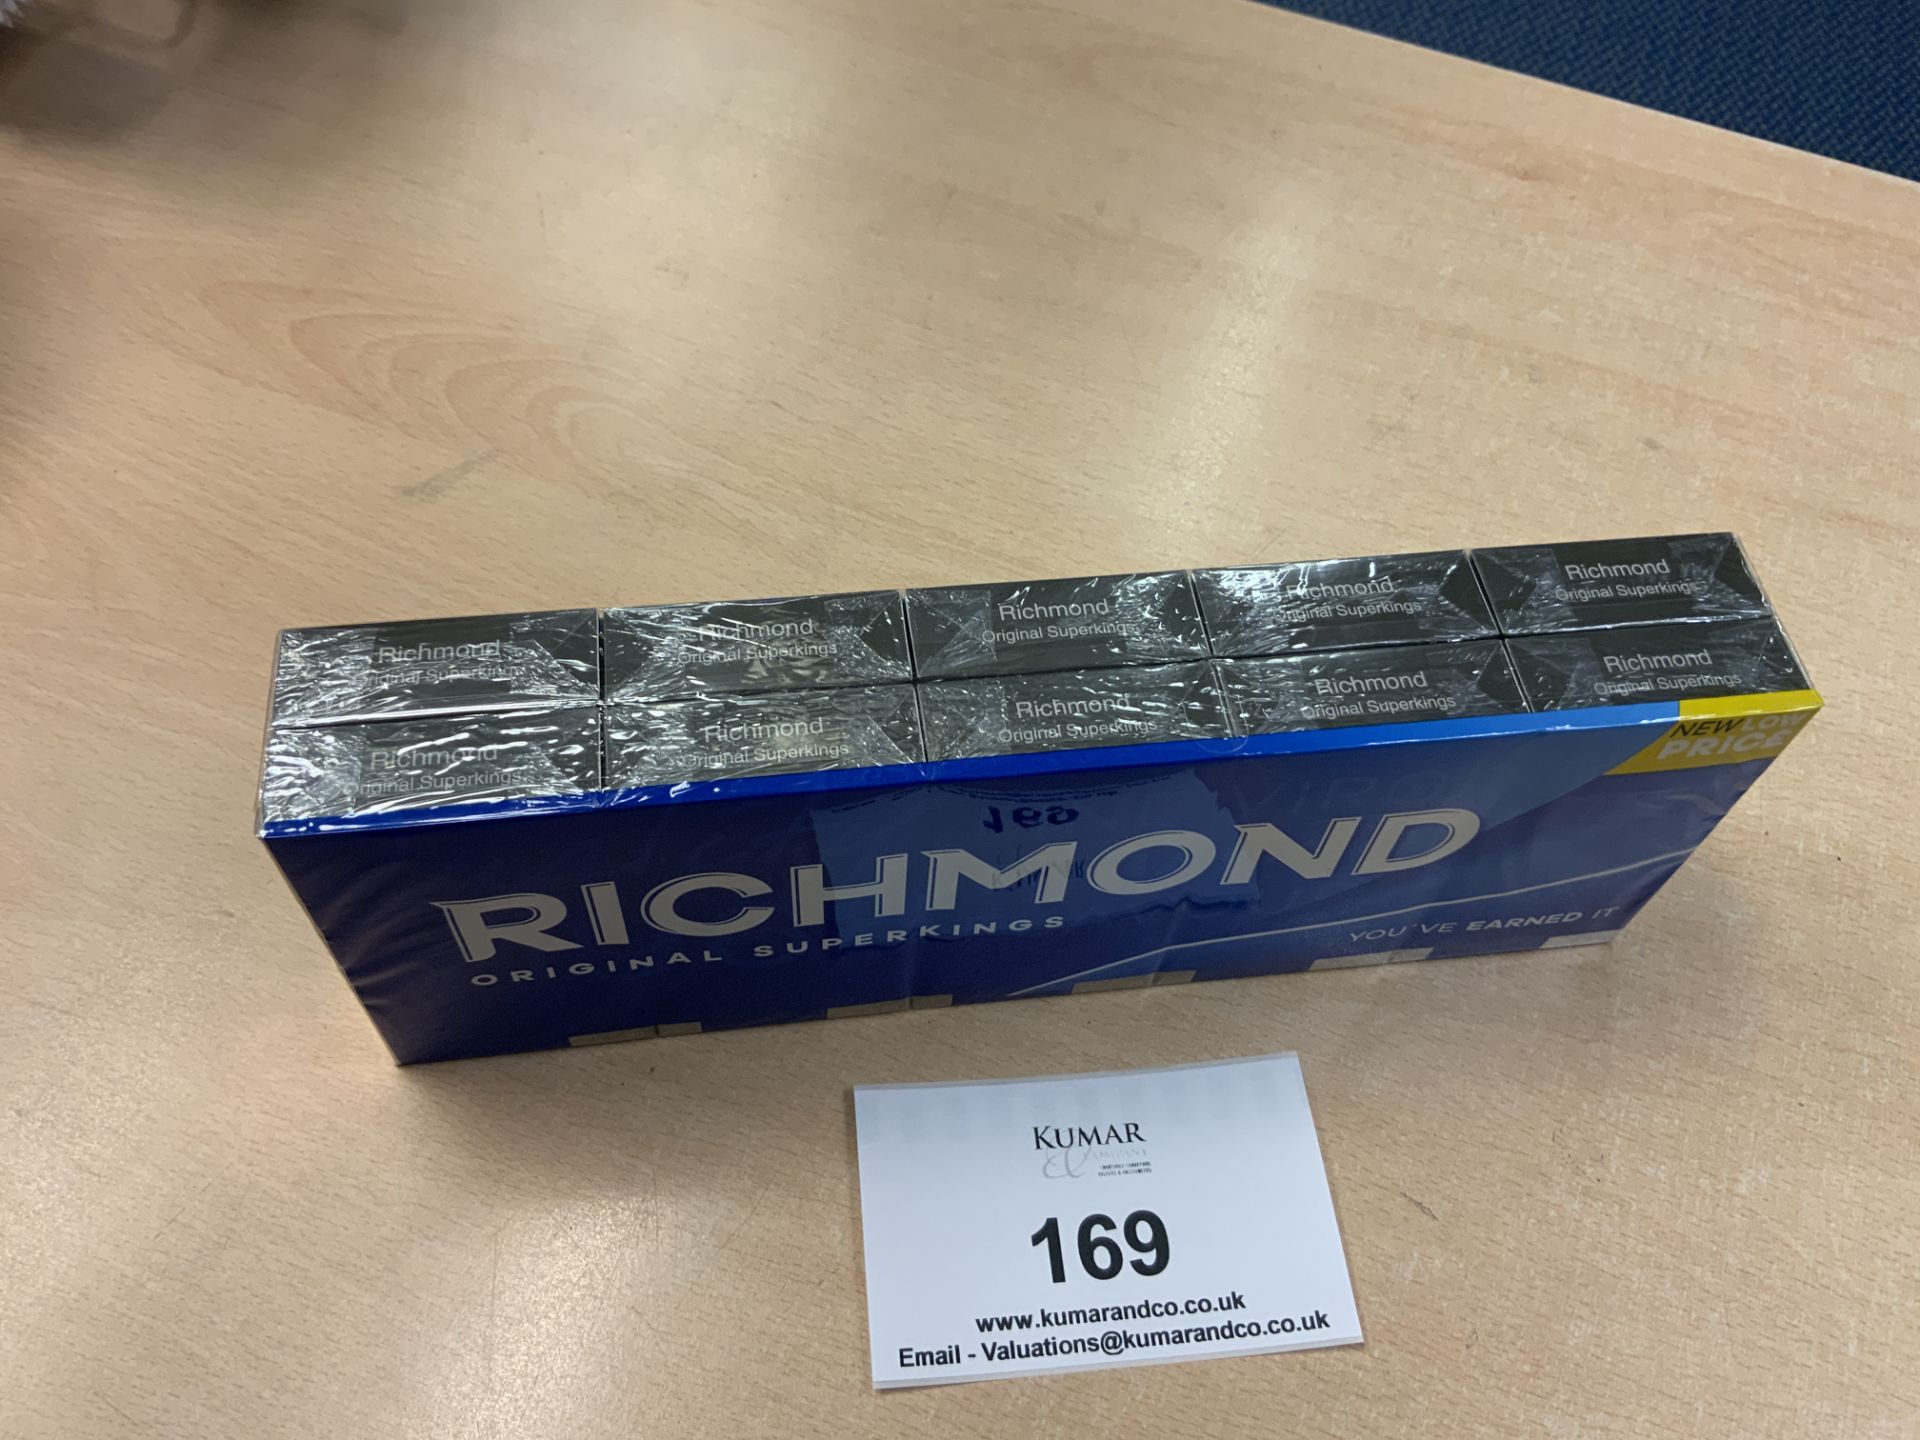 1: Outer 10 x 20 Richmond Original Superking Unopened Cigarettes - Image 2 of 4